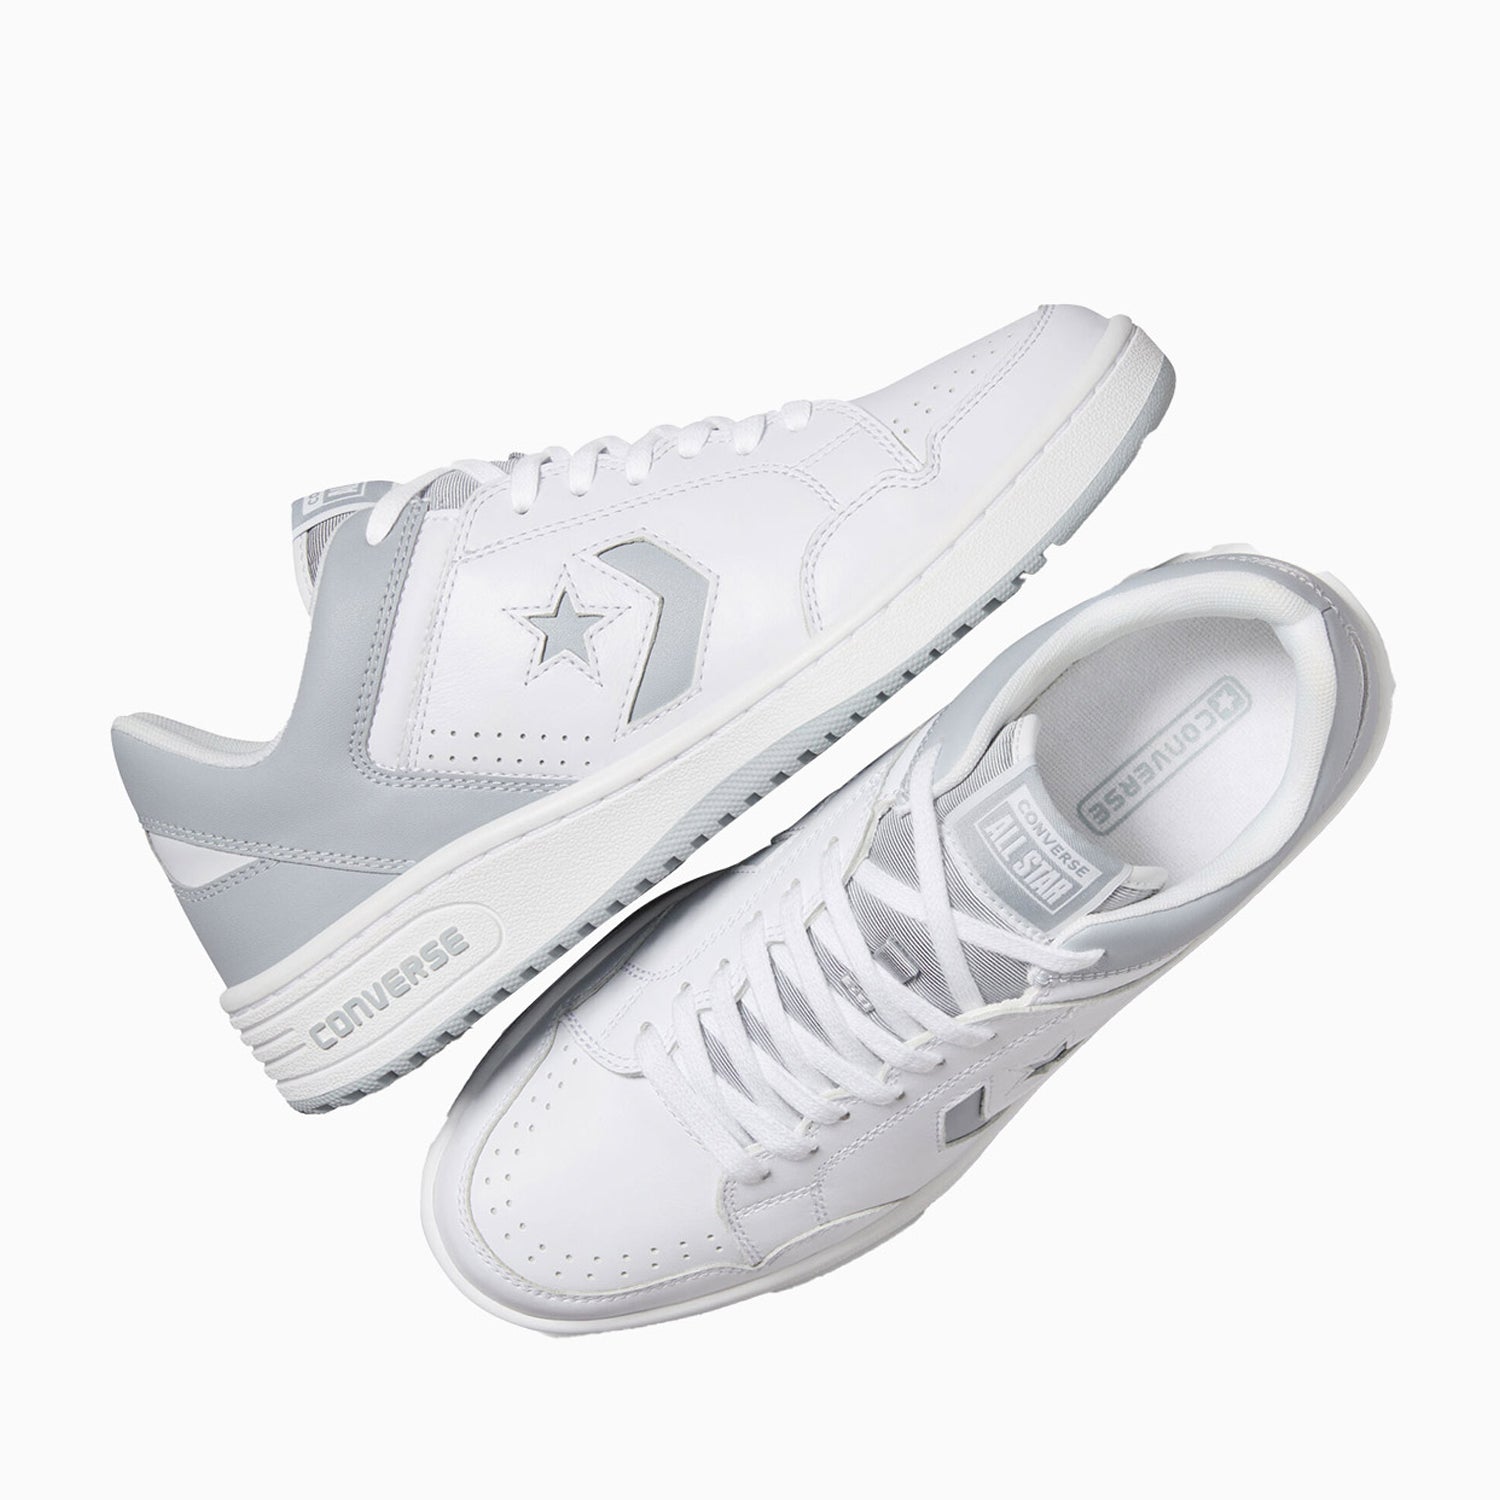 Converse Weapon Classic Shoes